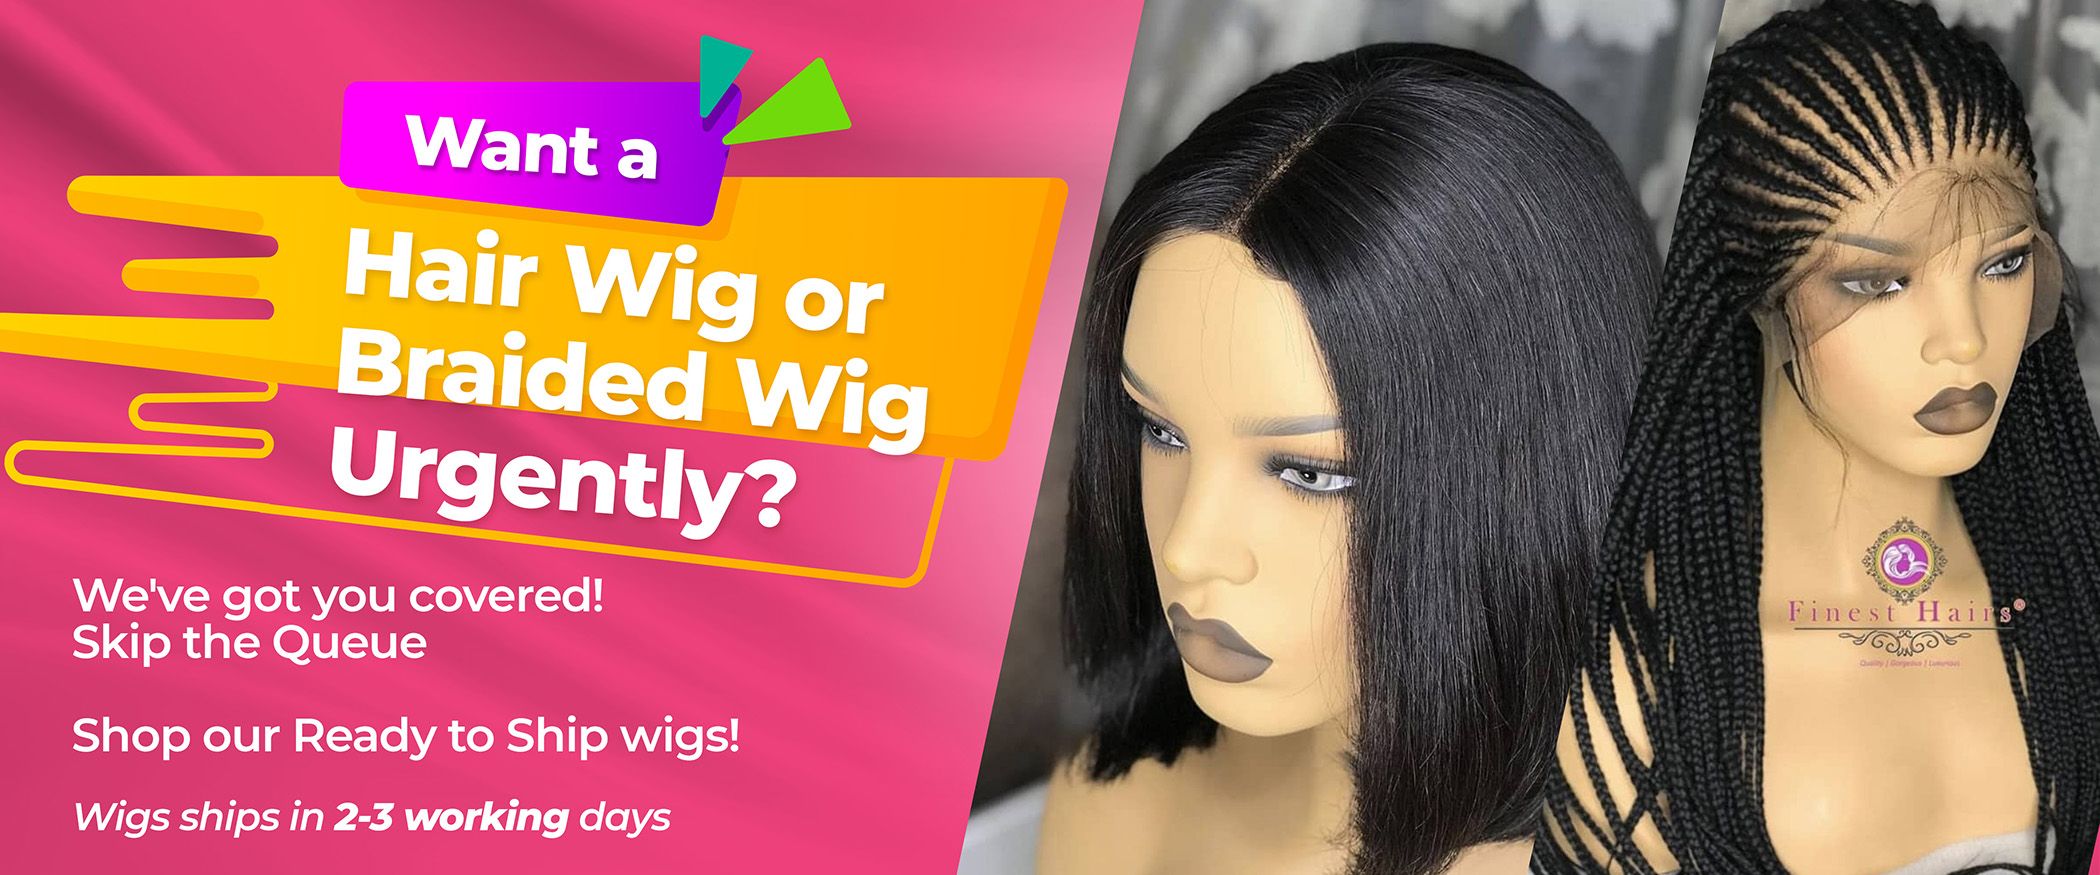 This is for the All Ready to Ship Wigs